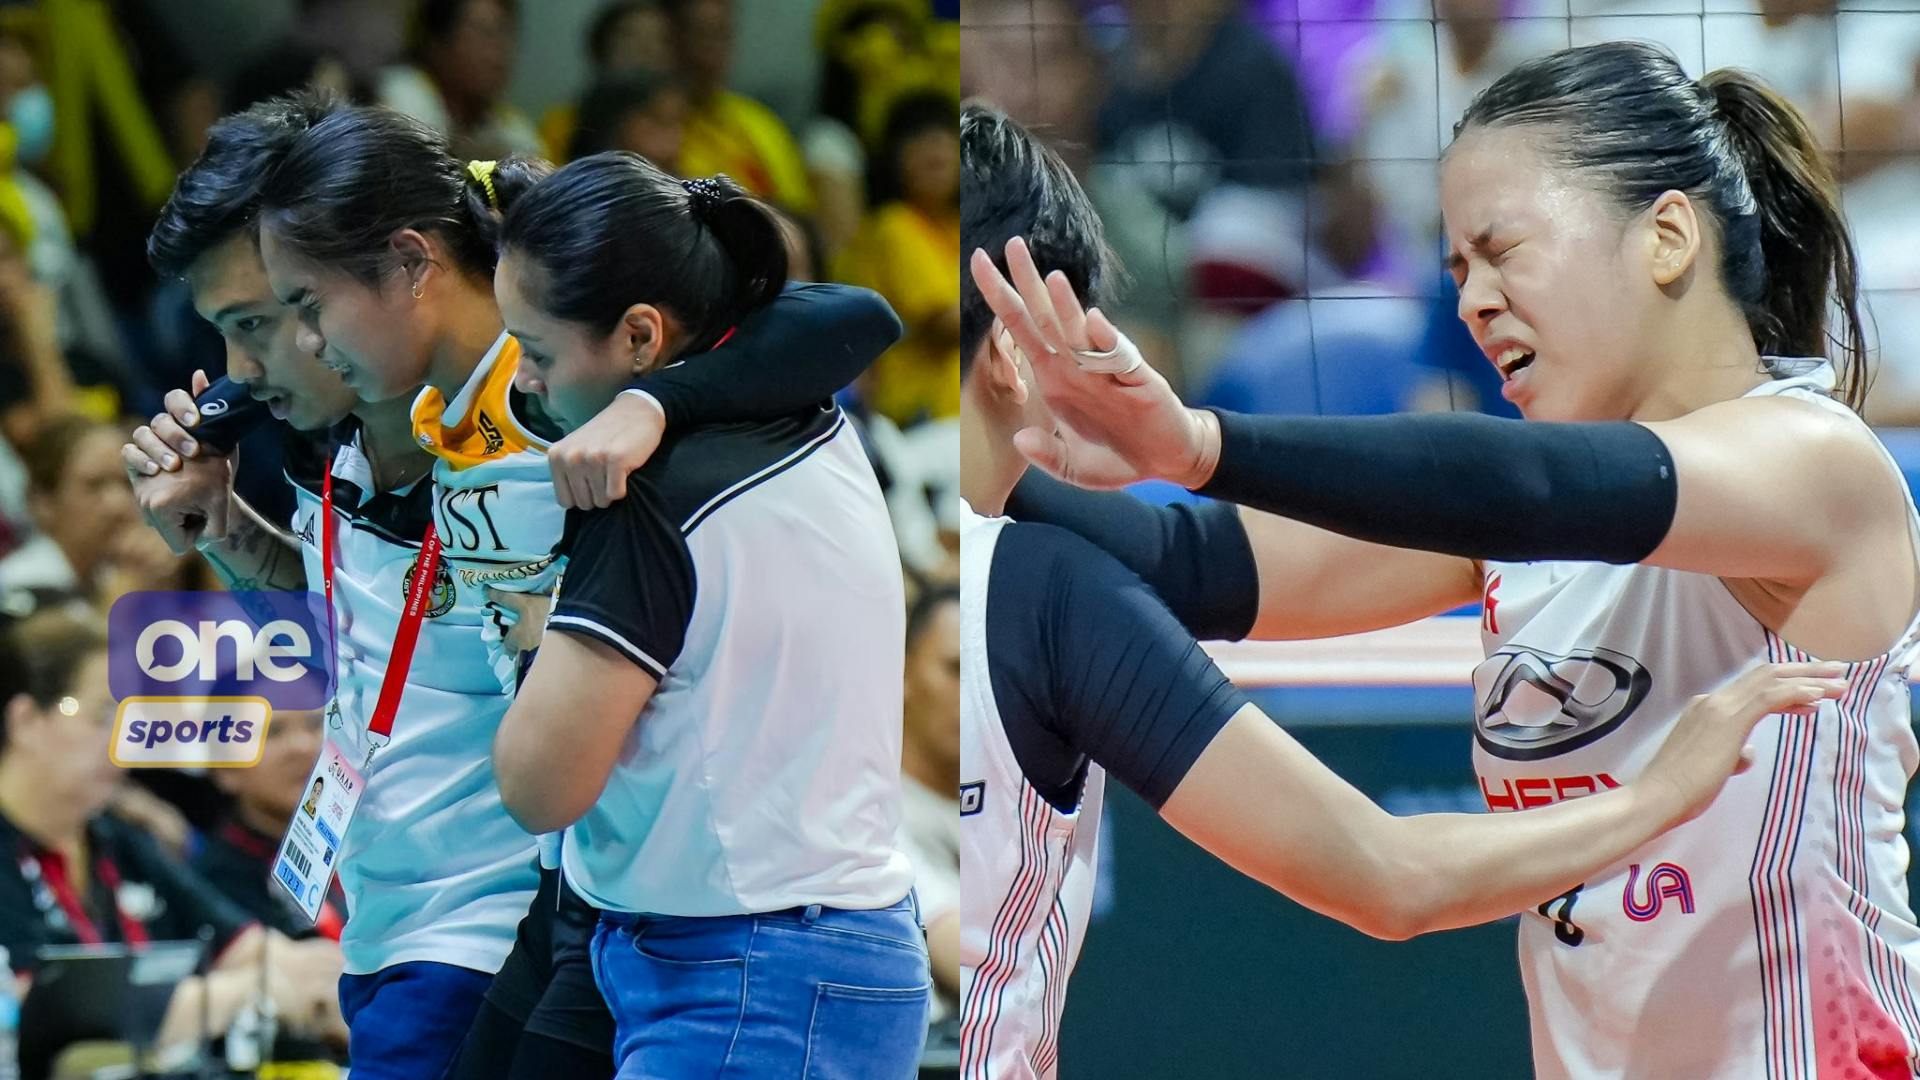 "Flash back" | Eya Laure turns emotional over UST rookie Angge Poyos’ injury in UAAP Game 1 Finals